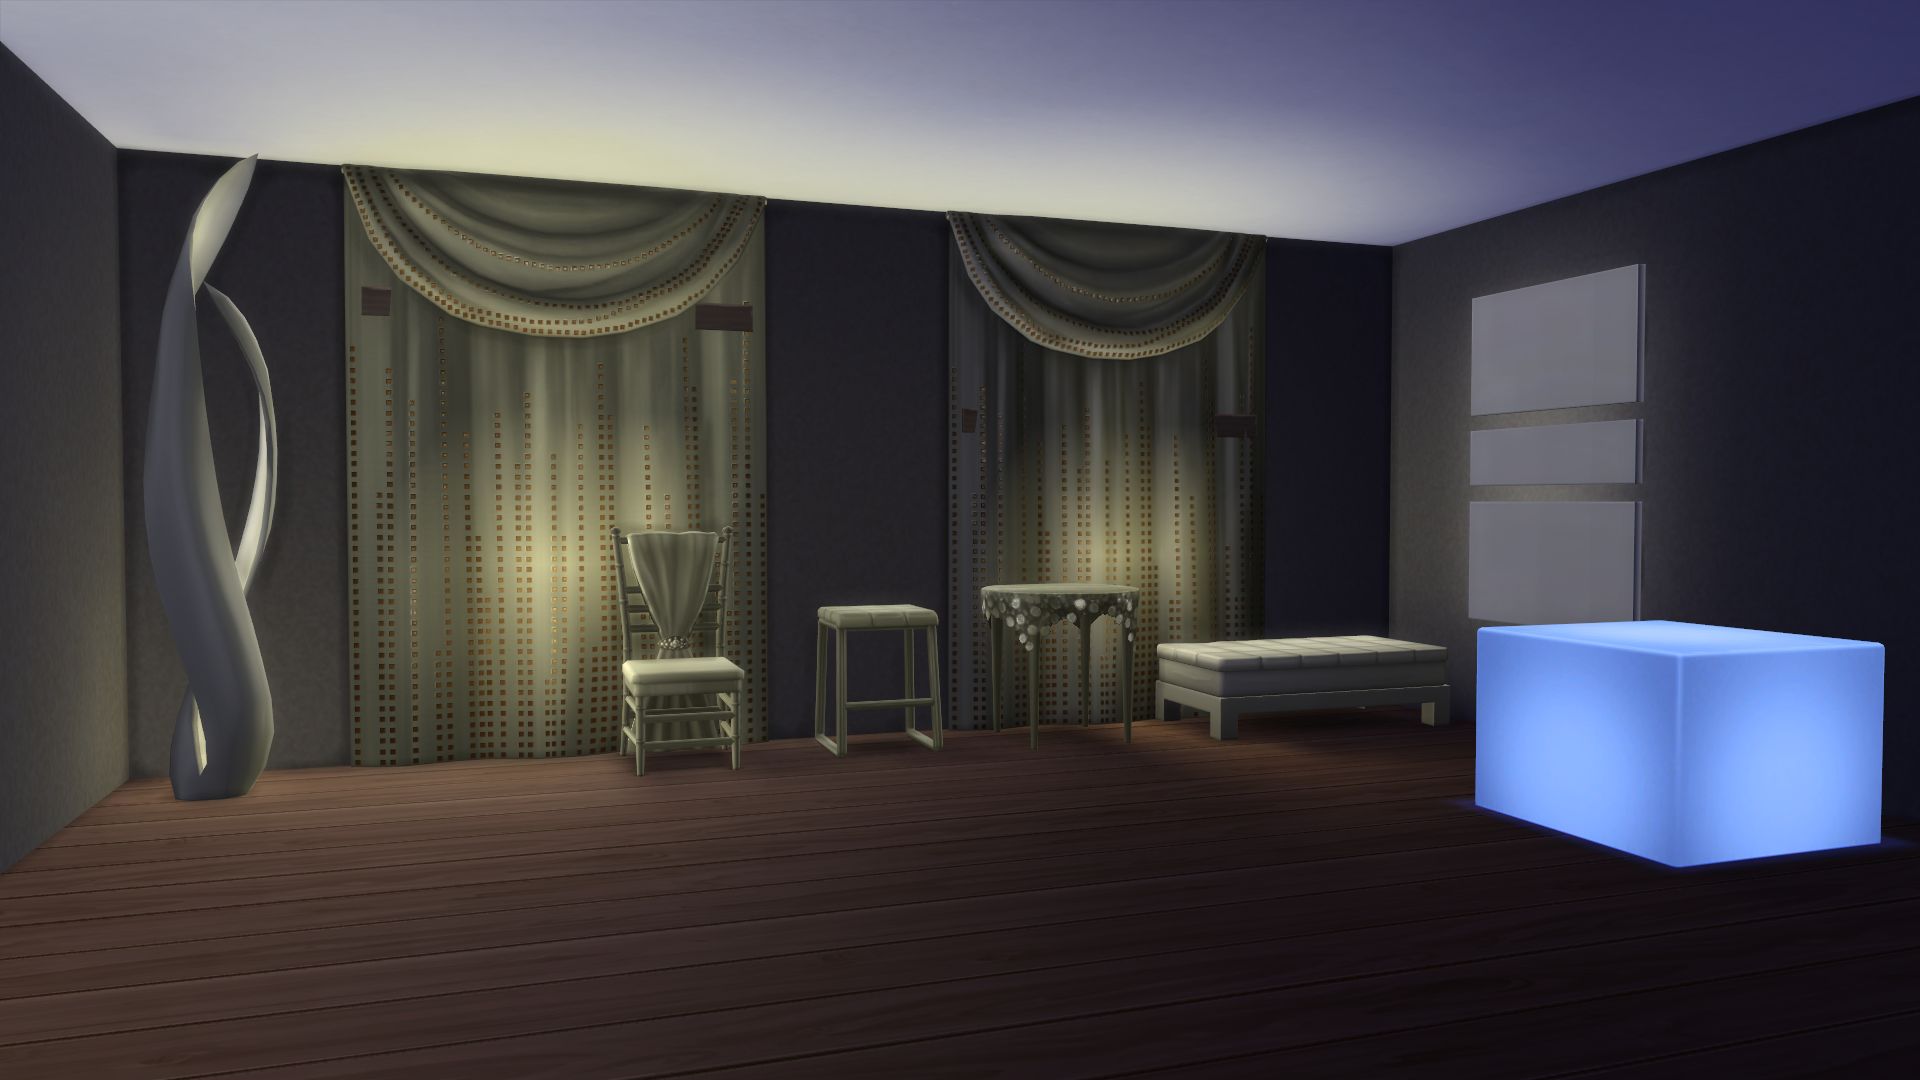 The Sims 4 Luxury Stuff: New Object Collage